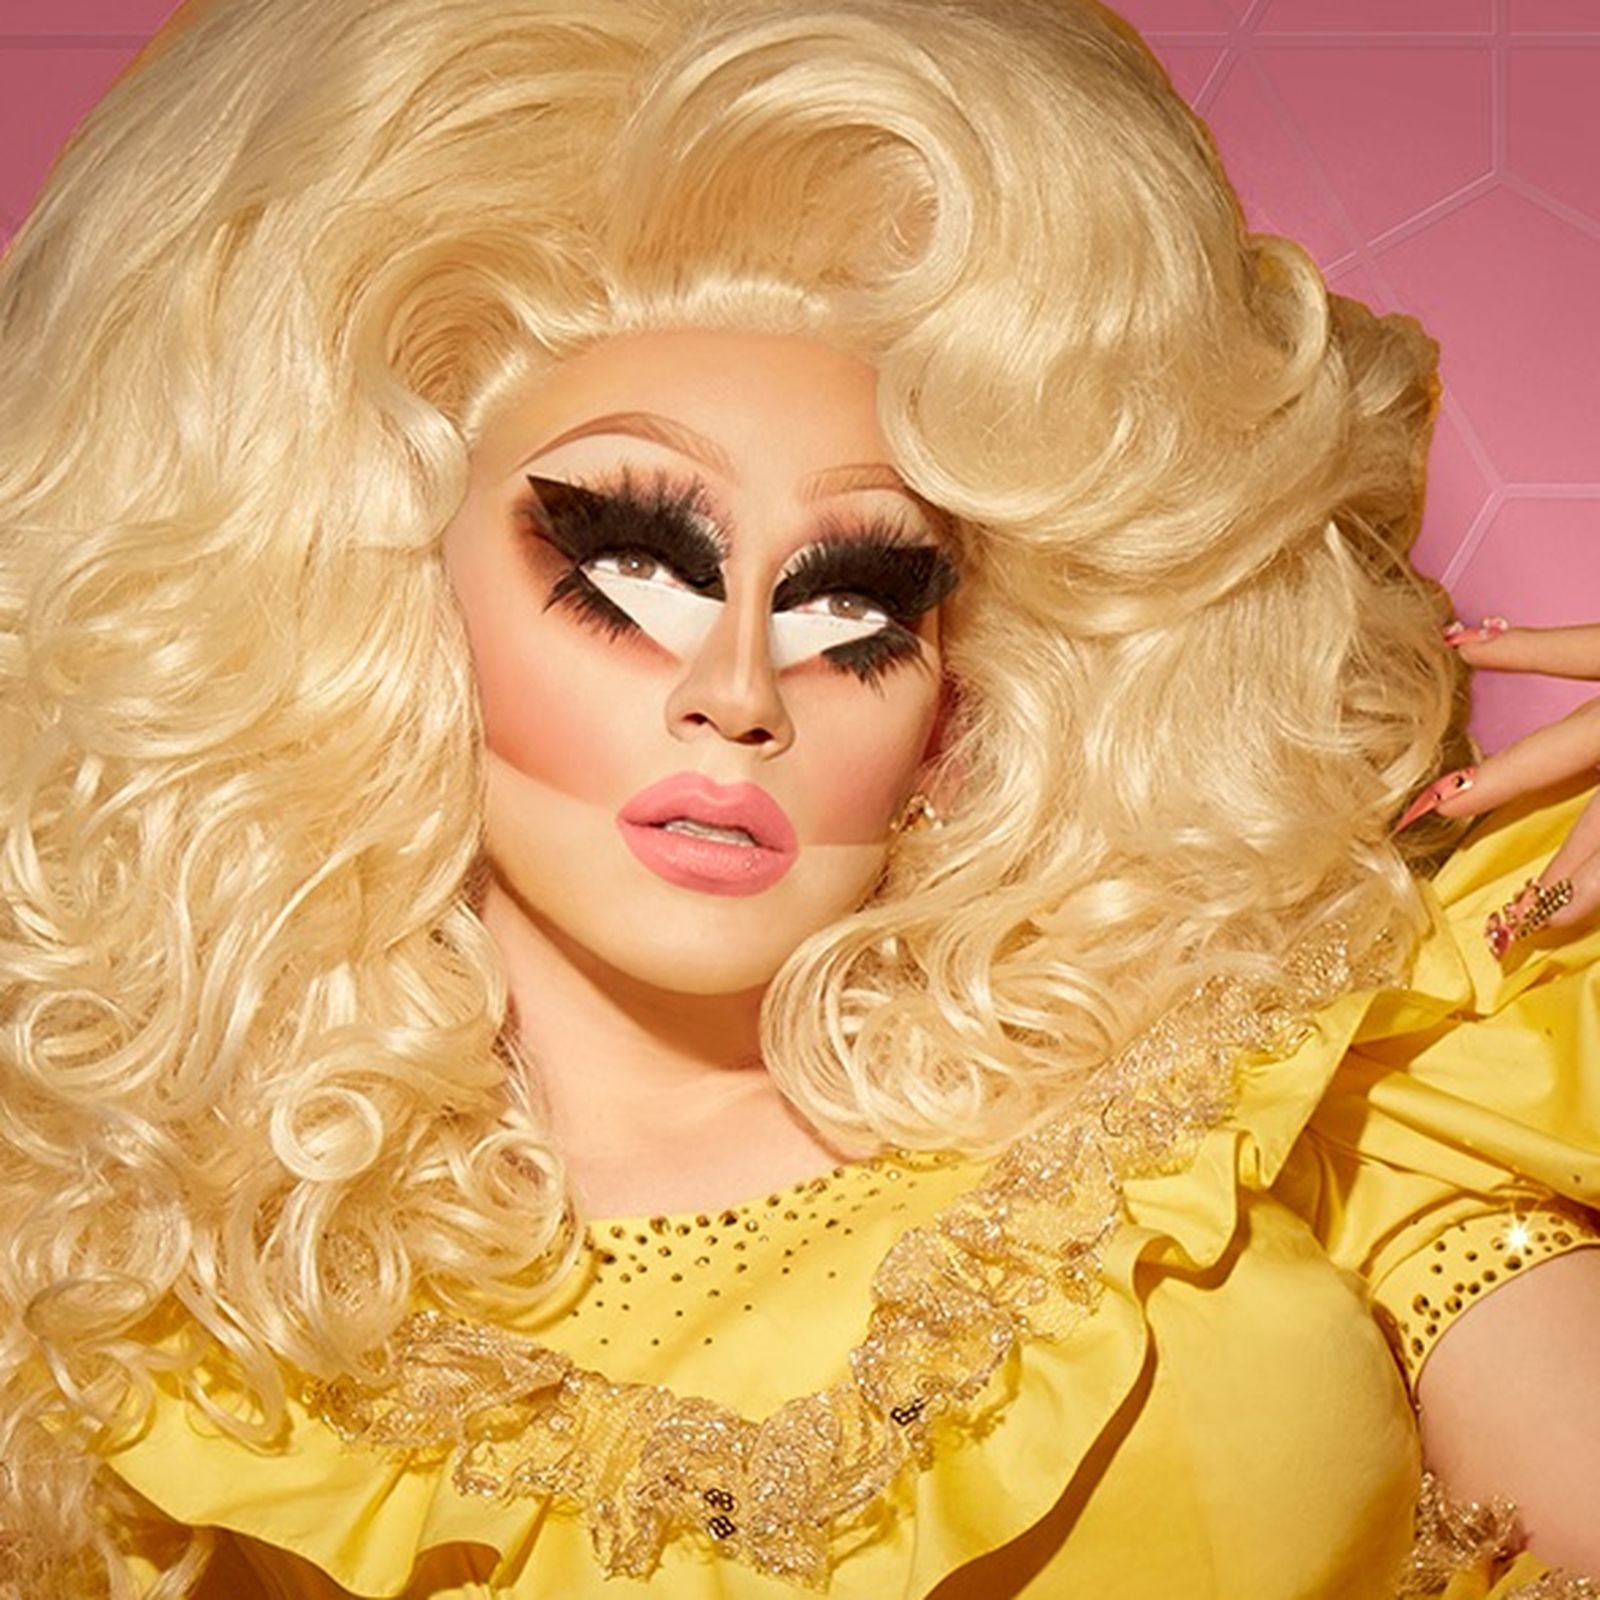 Drag Eye Makeup Trixie Mattel Talks New Makeup Collection And Why Its A Weird